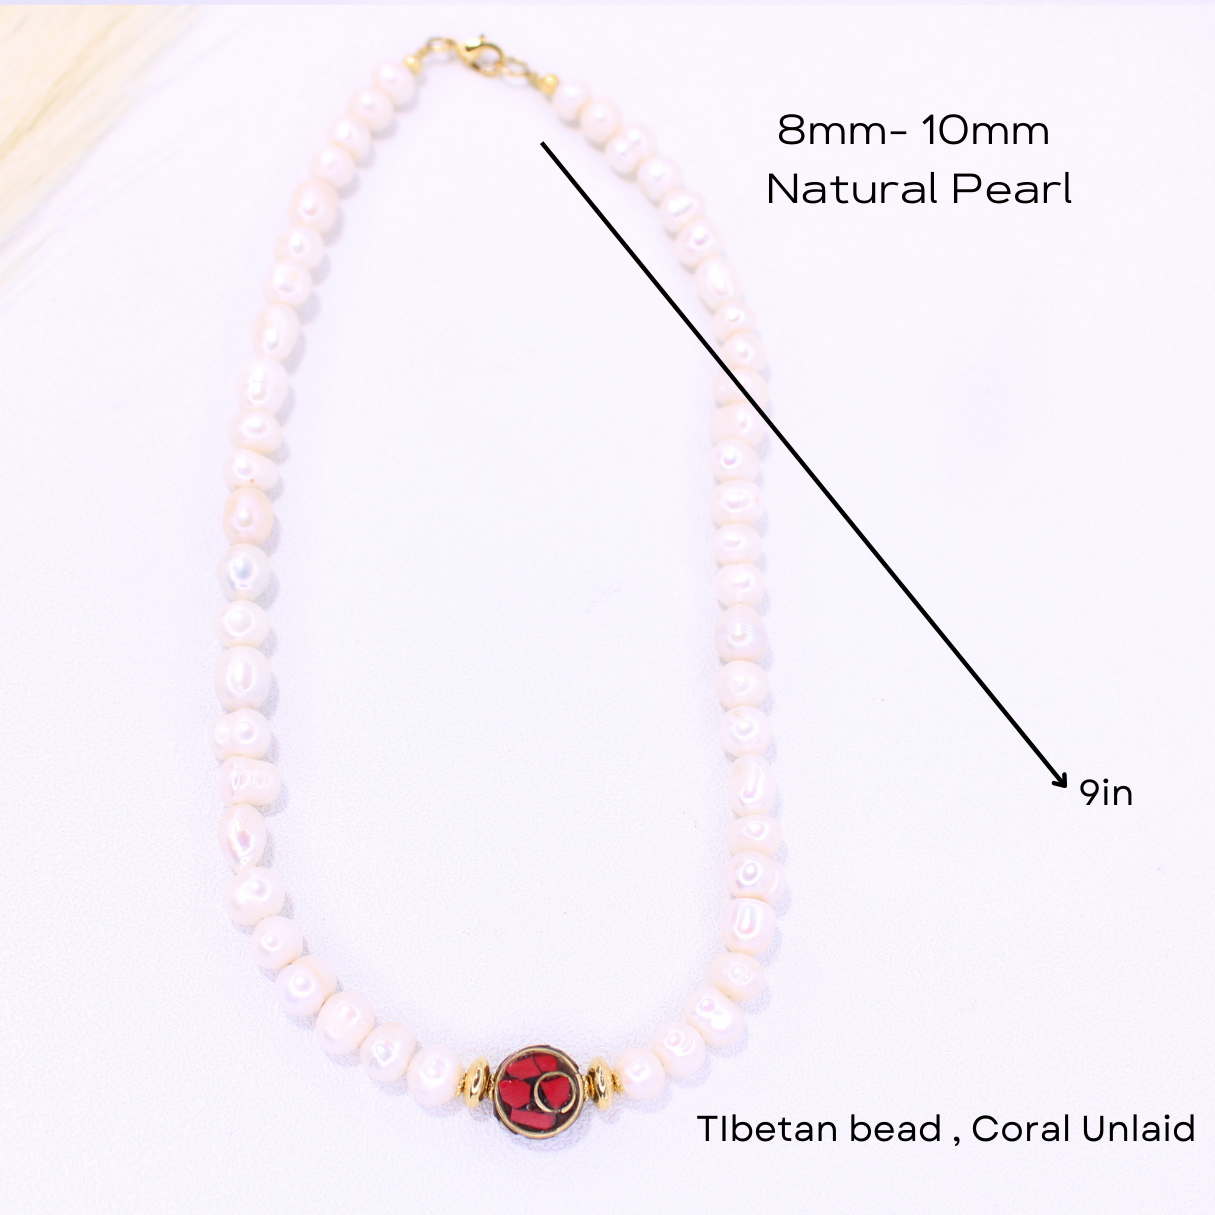 freshwater pearls with Tibetan beads with inlaid coral